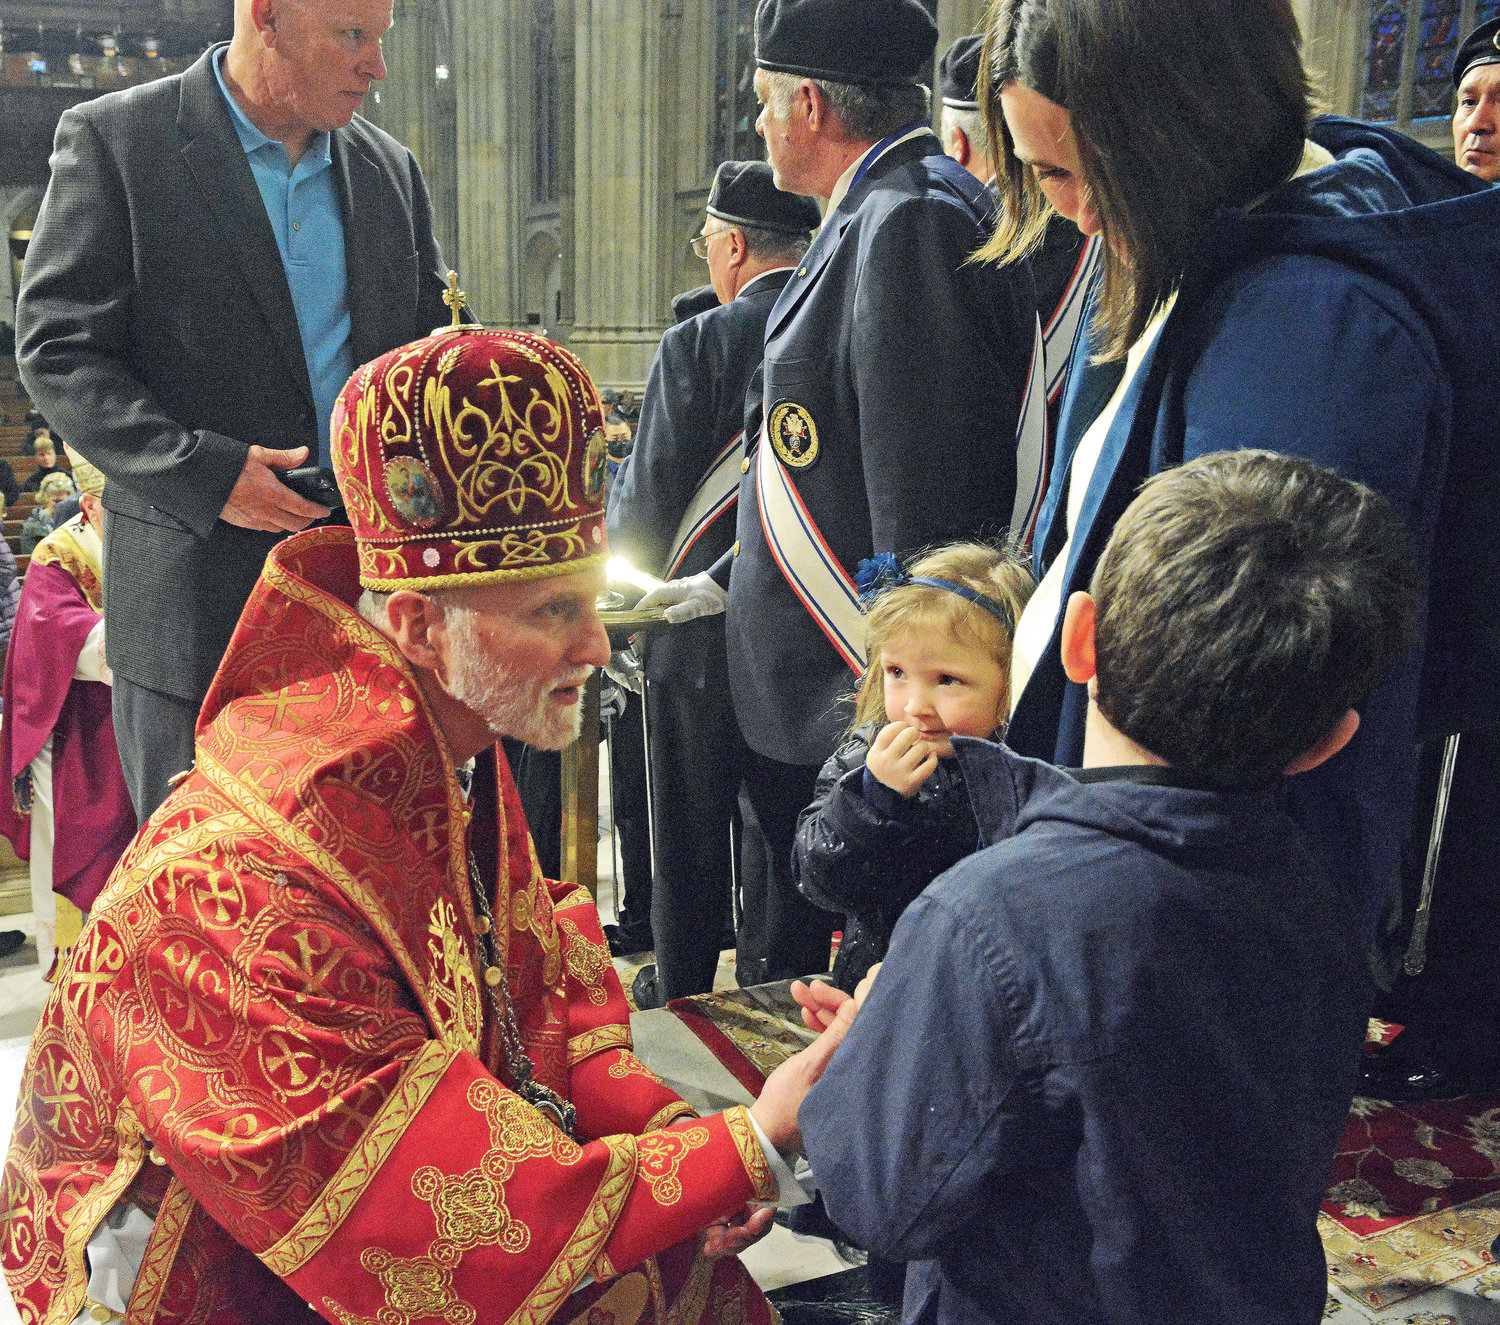 Archbishop Borys Gudziak of the Ukrainian Catholic Archeparchy of Philadelphia greets young Elizabeth and Eugene Rodomon along with their mother, Katarina, who escaped the war in Ukraine three weeks ago and are being assisted by a parish in Belle Harbor, Queens. They were at St. Patrick’s Cathedral April 3 for a Mass Cardinal Dolan offered for the world’s persecuted Christians.